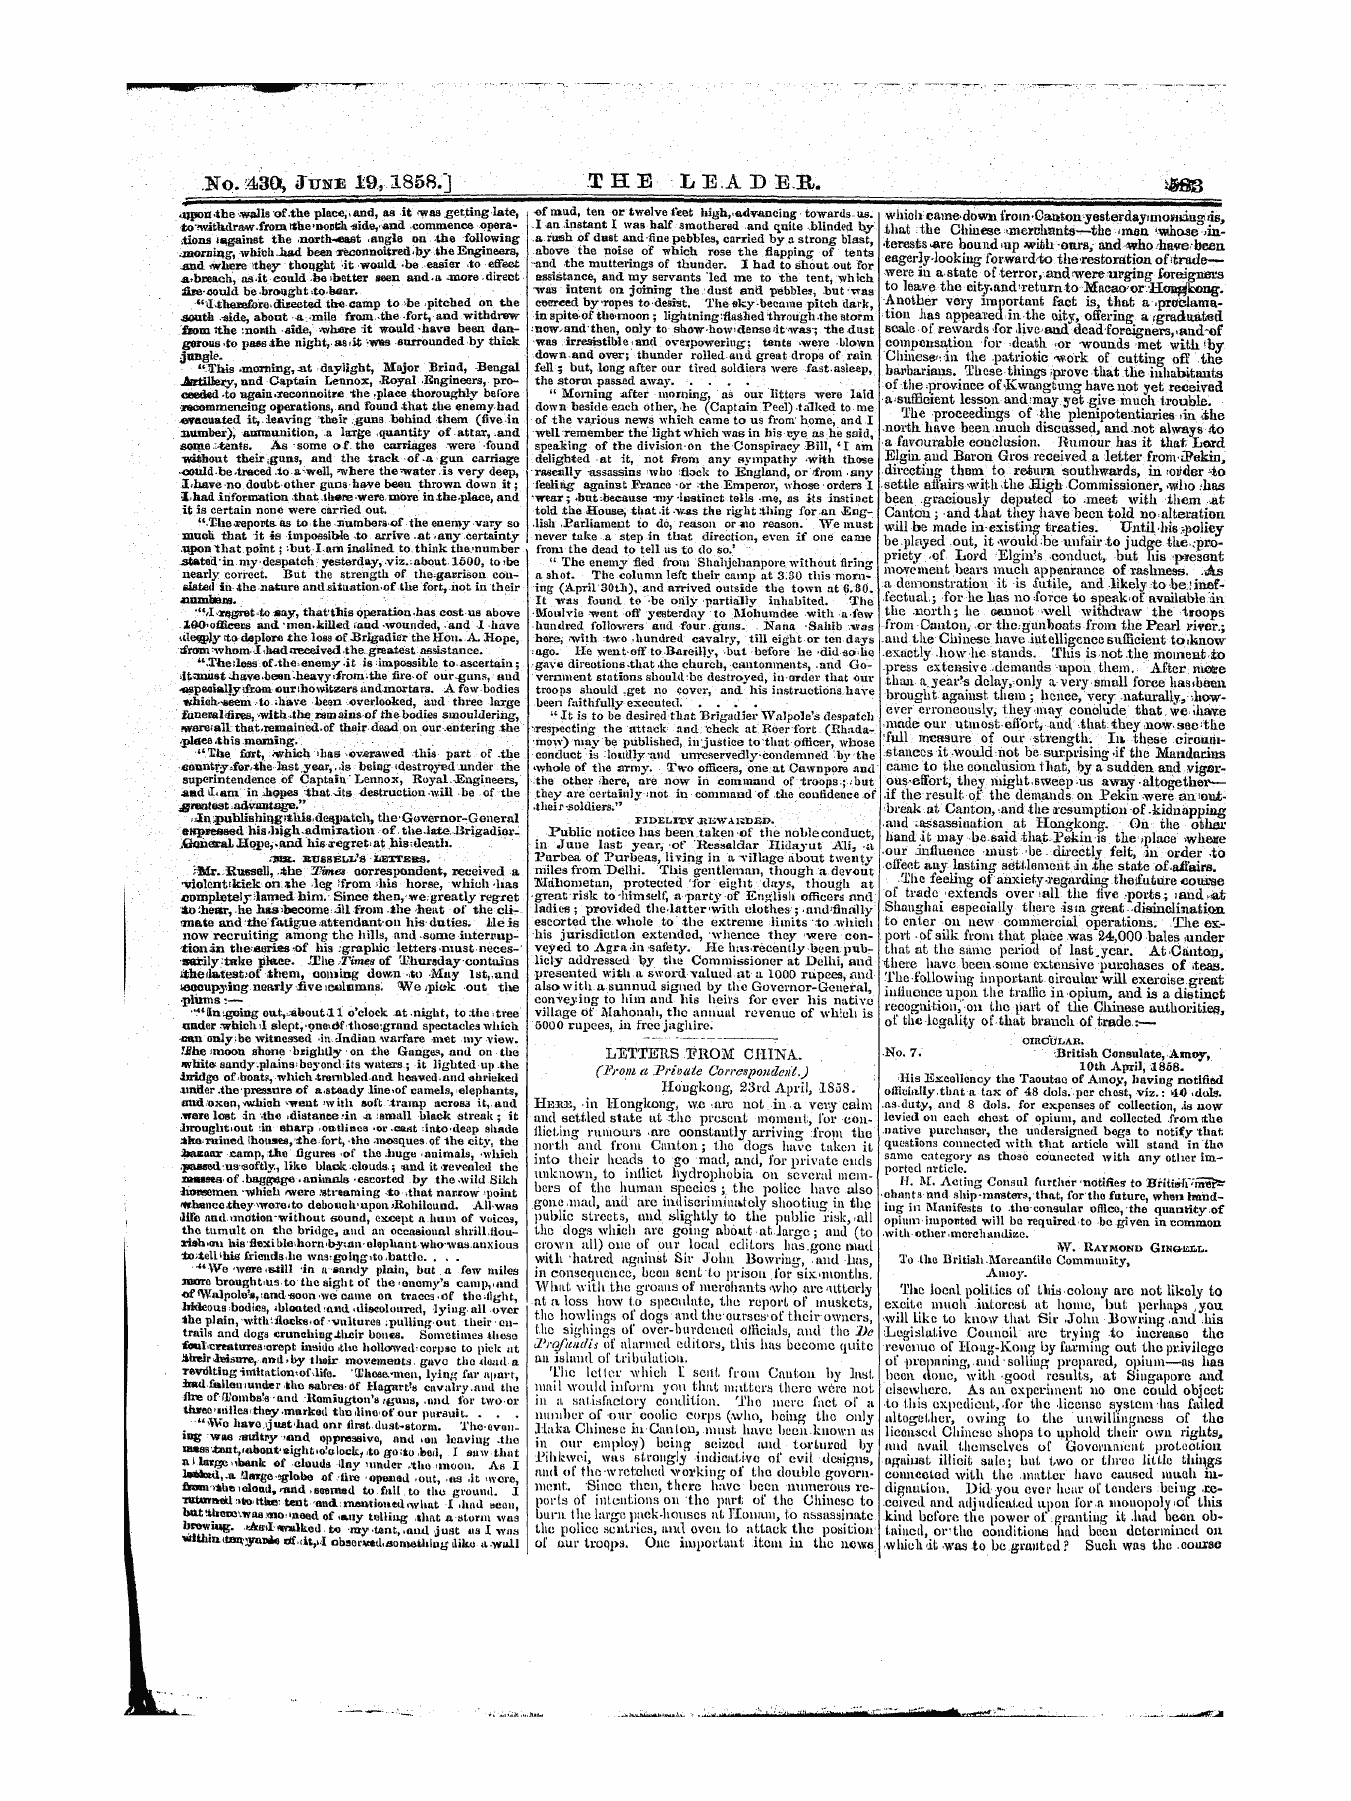 Leader (1850-1860): jS F Y, 1st edition: 7